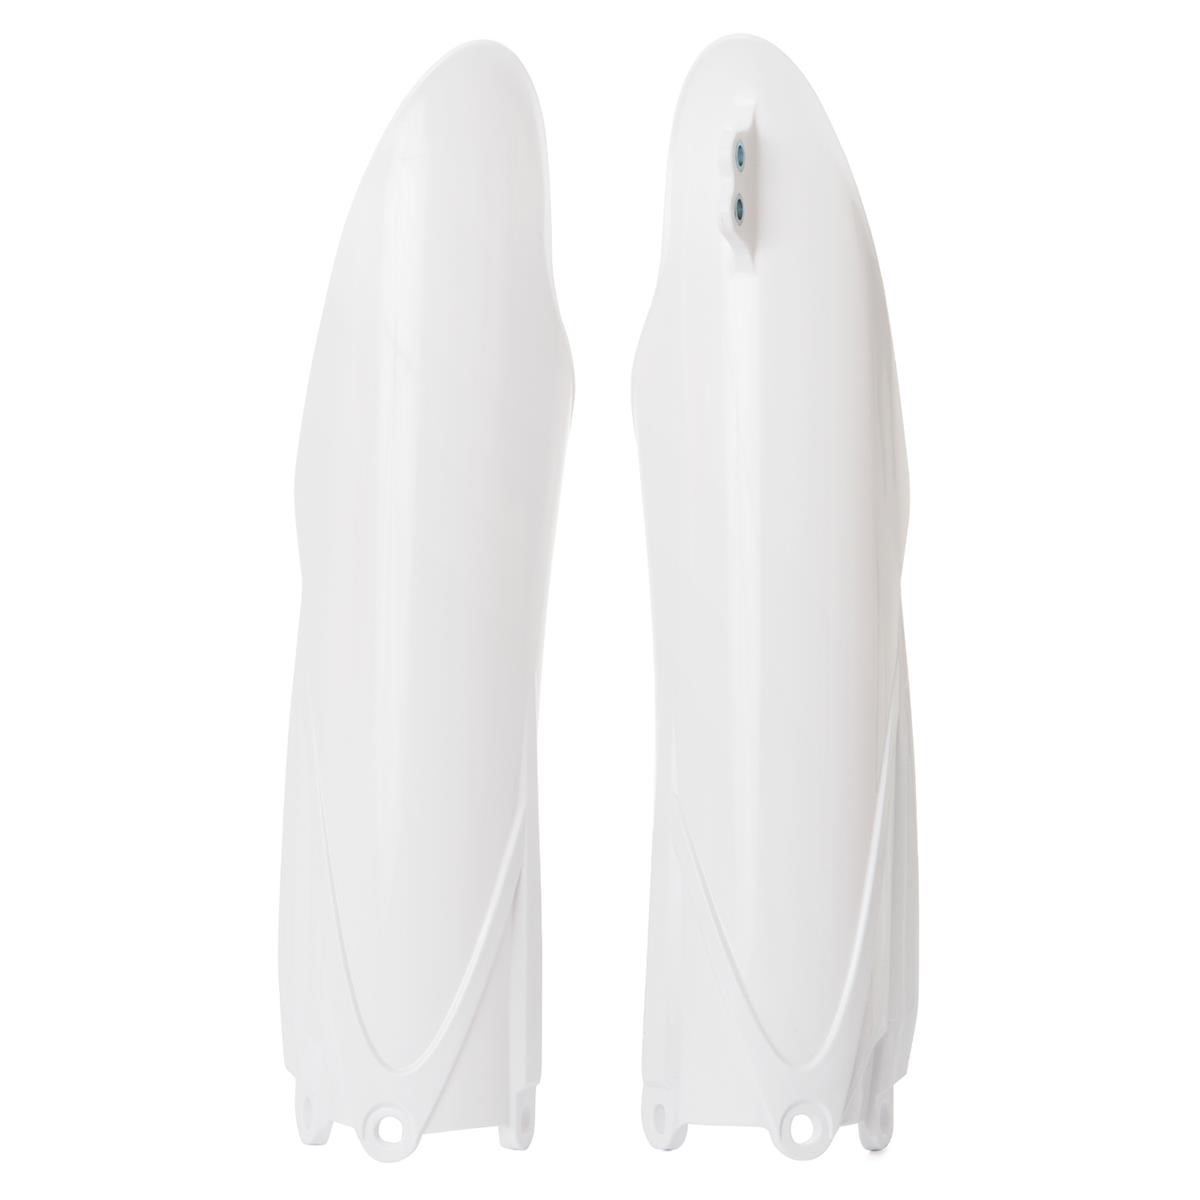 Acerbis Lower Fork Covers  Yamaha YZ 85 02-18, White